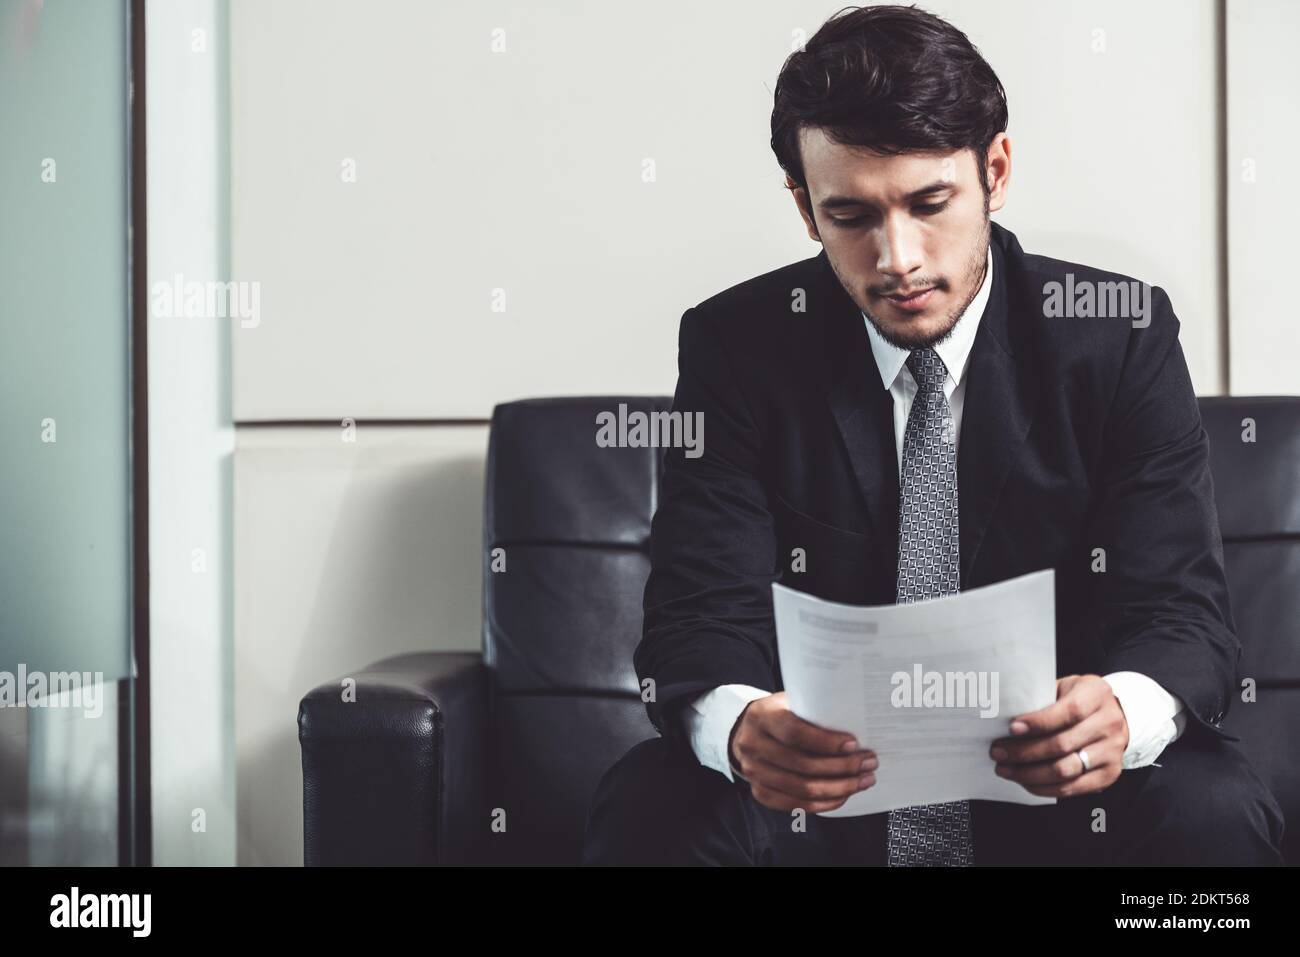 Stressed businessman candidate sit and wait for interview at the company office. Job application, business recruitment and Asian labor hiring concept. Stock Photo